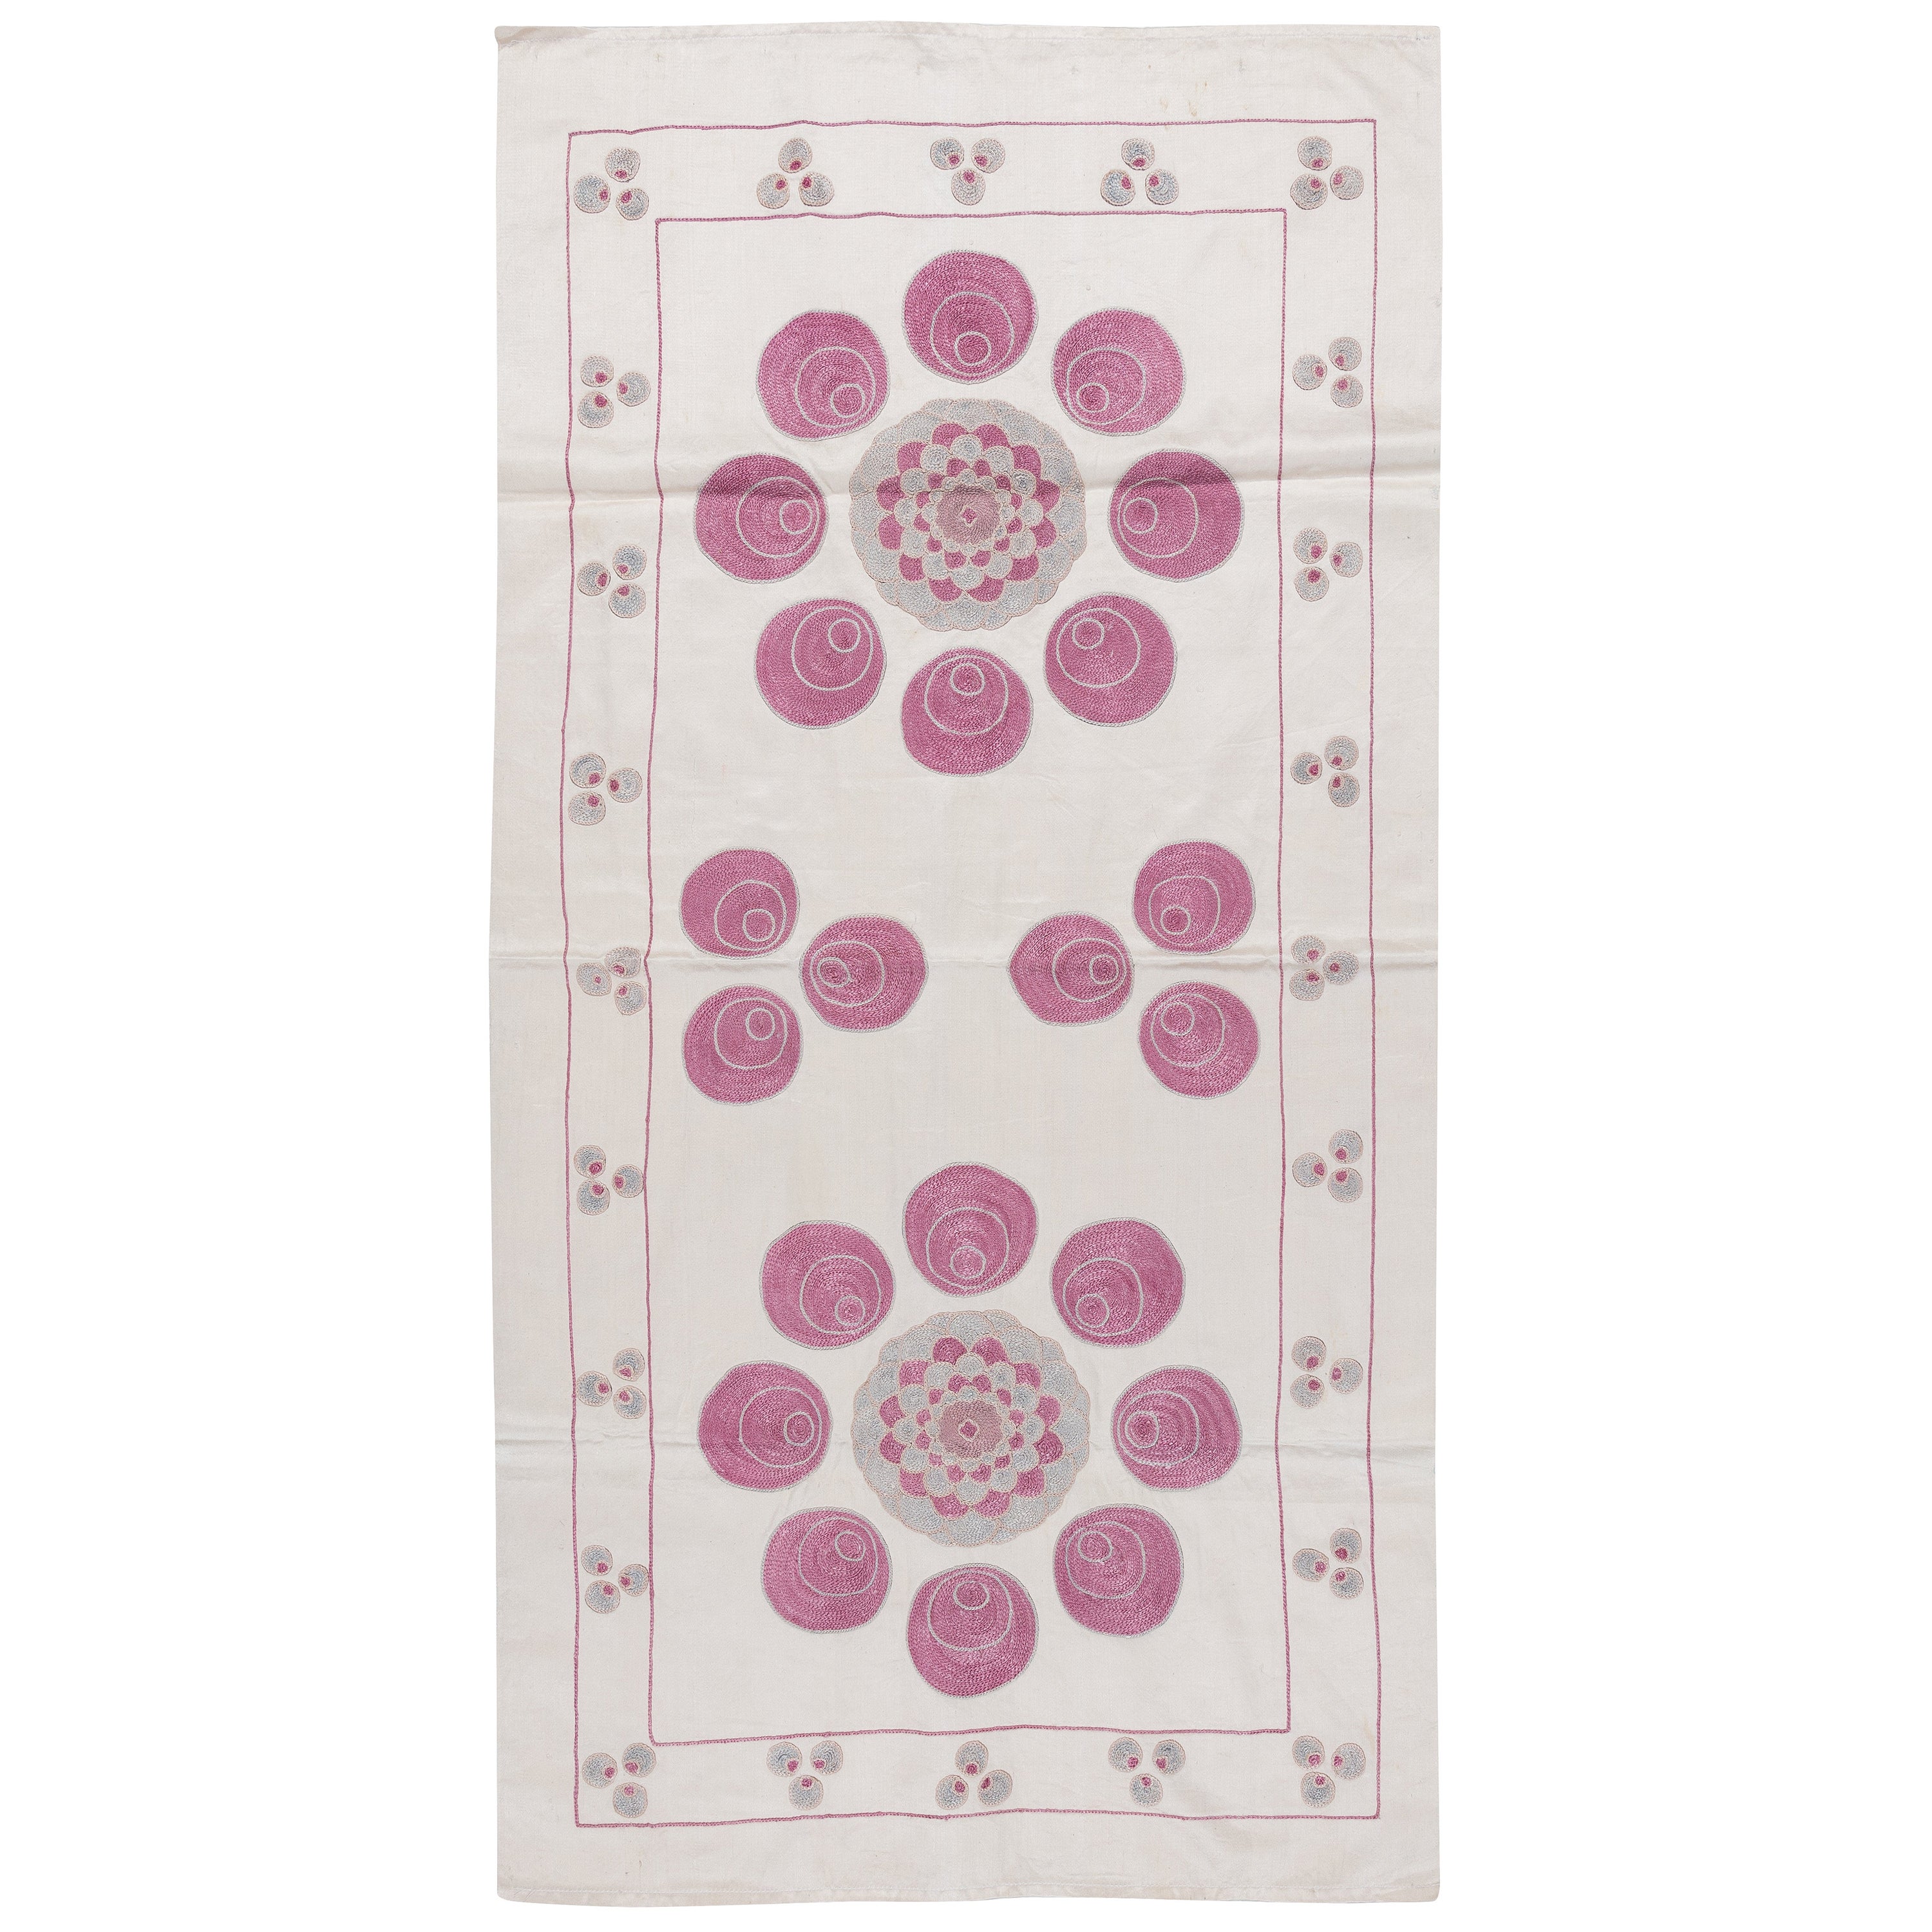 22"x42" 100% Silk Uzbek Wall Hanging, Suzani Embroidered Tapestry in Pink, Cream For Sale